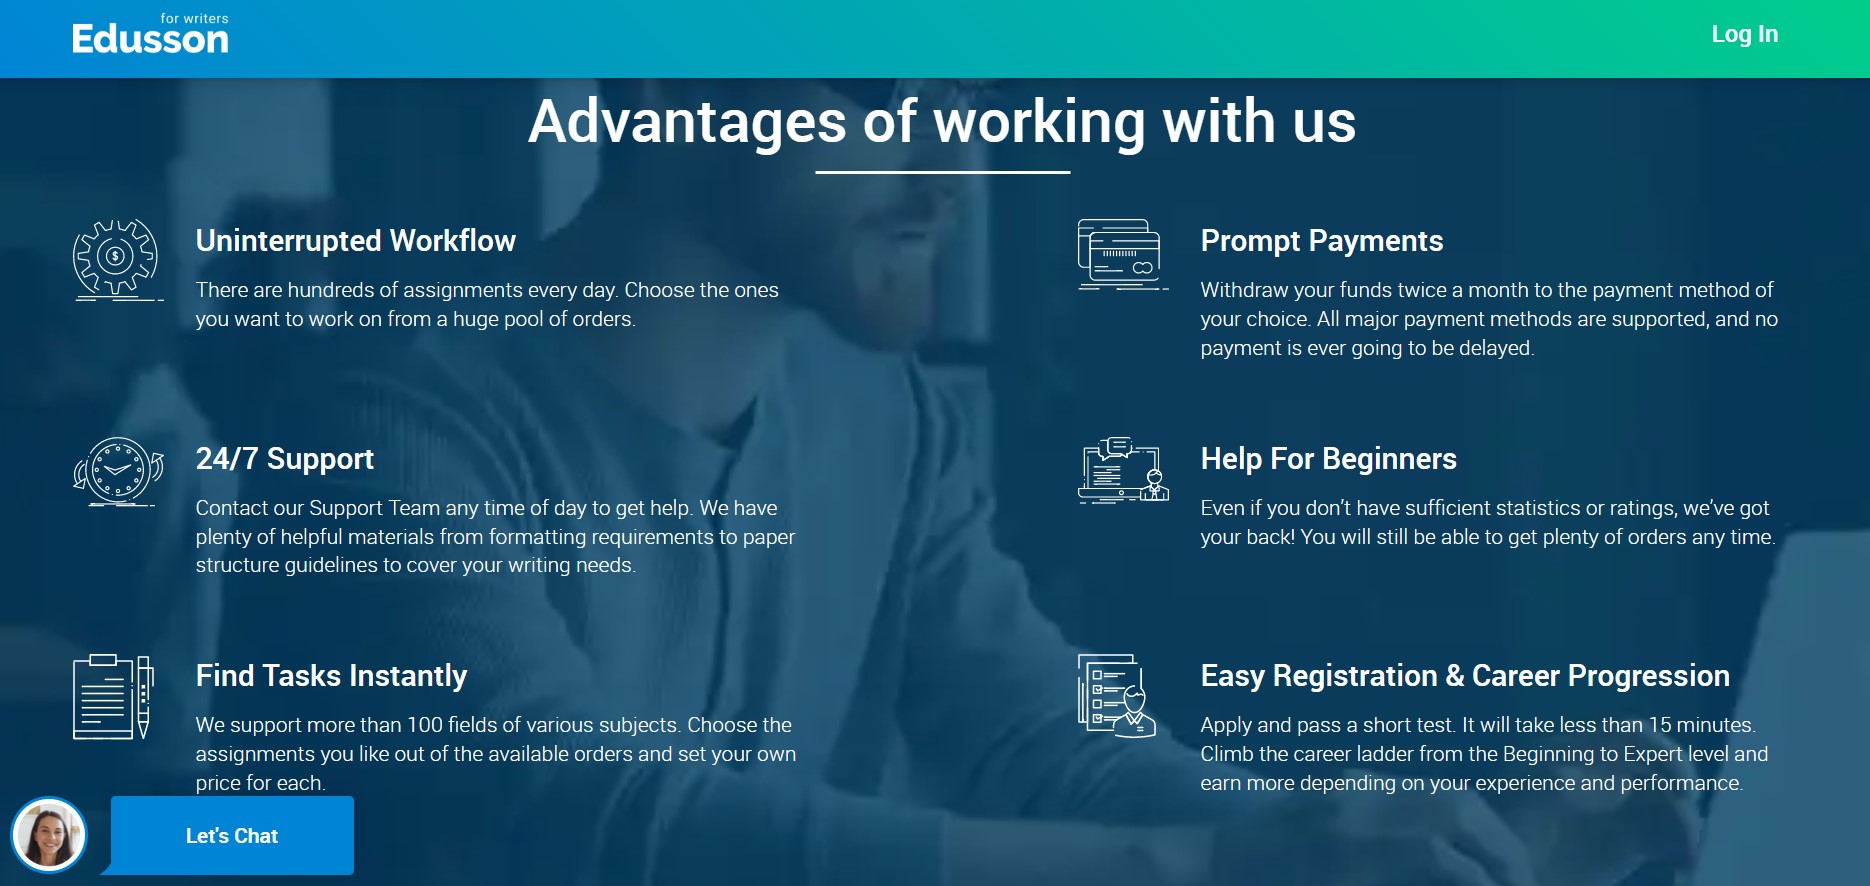 Edusson advantages of working with us